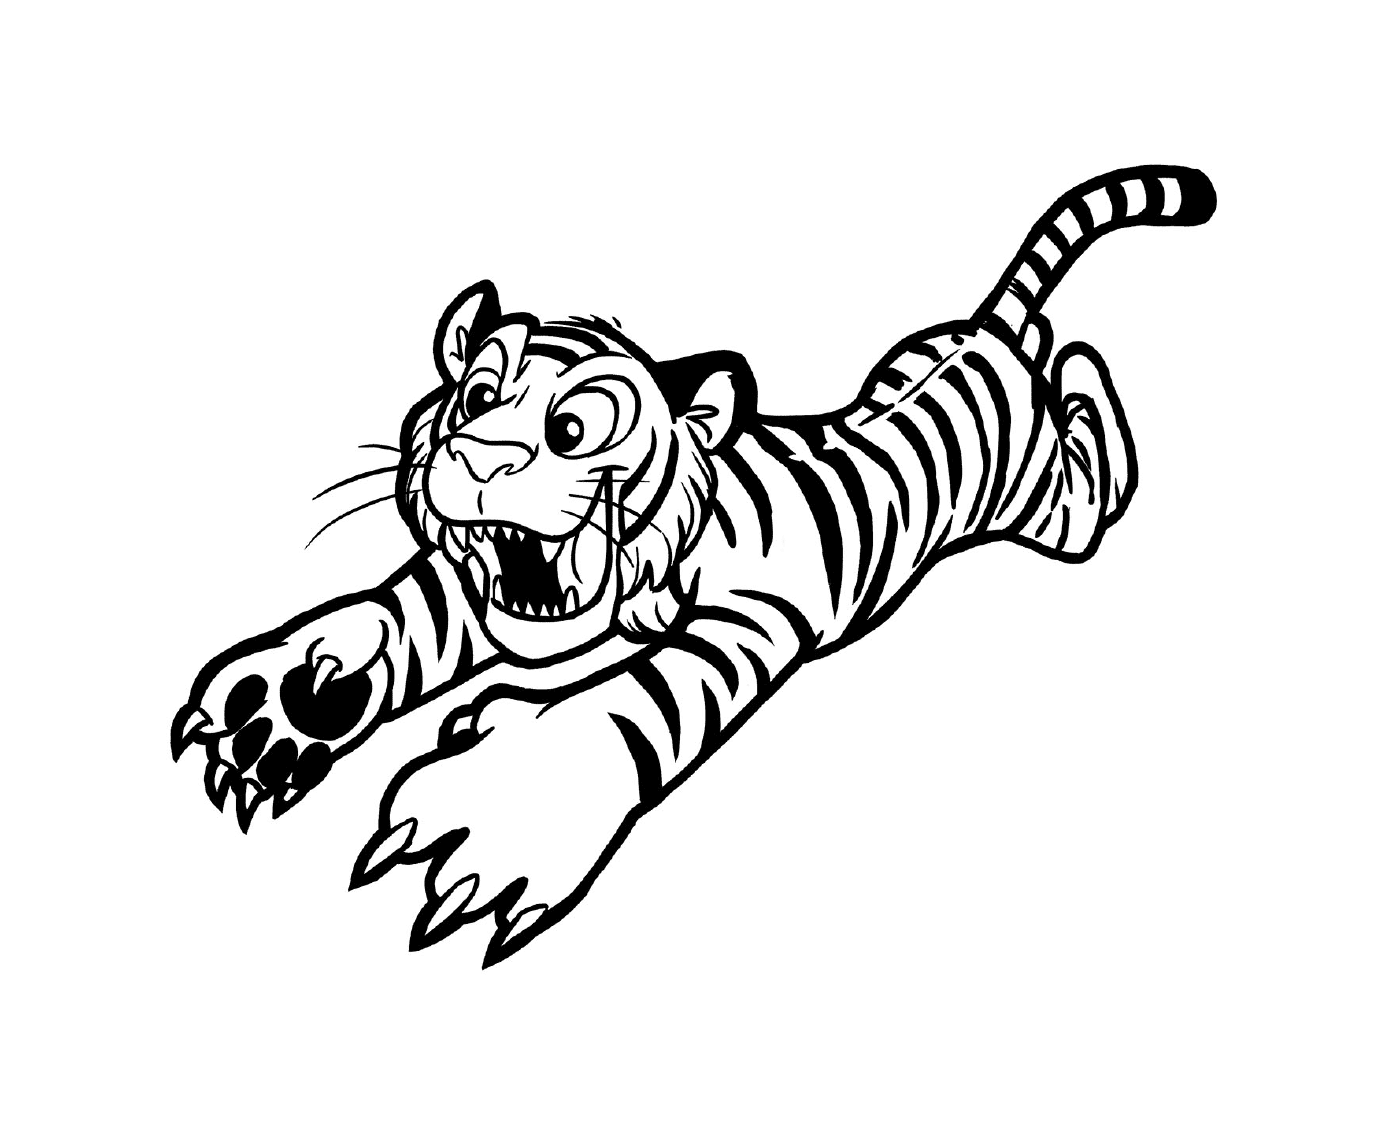  A tiger in action 